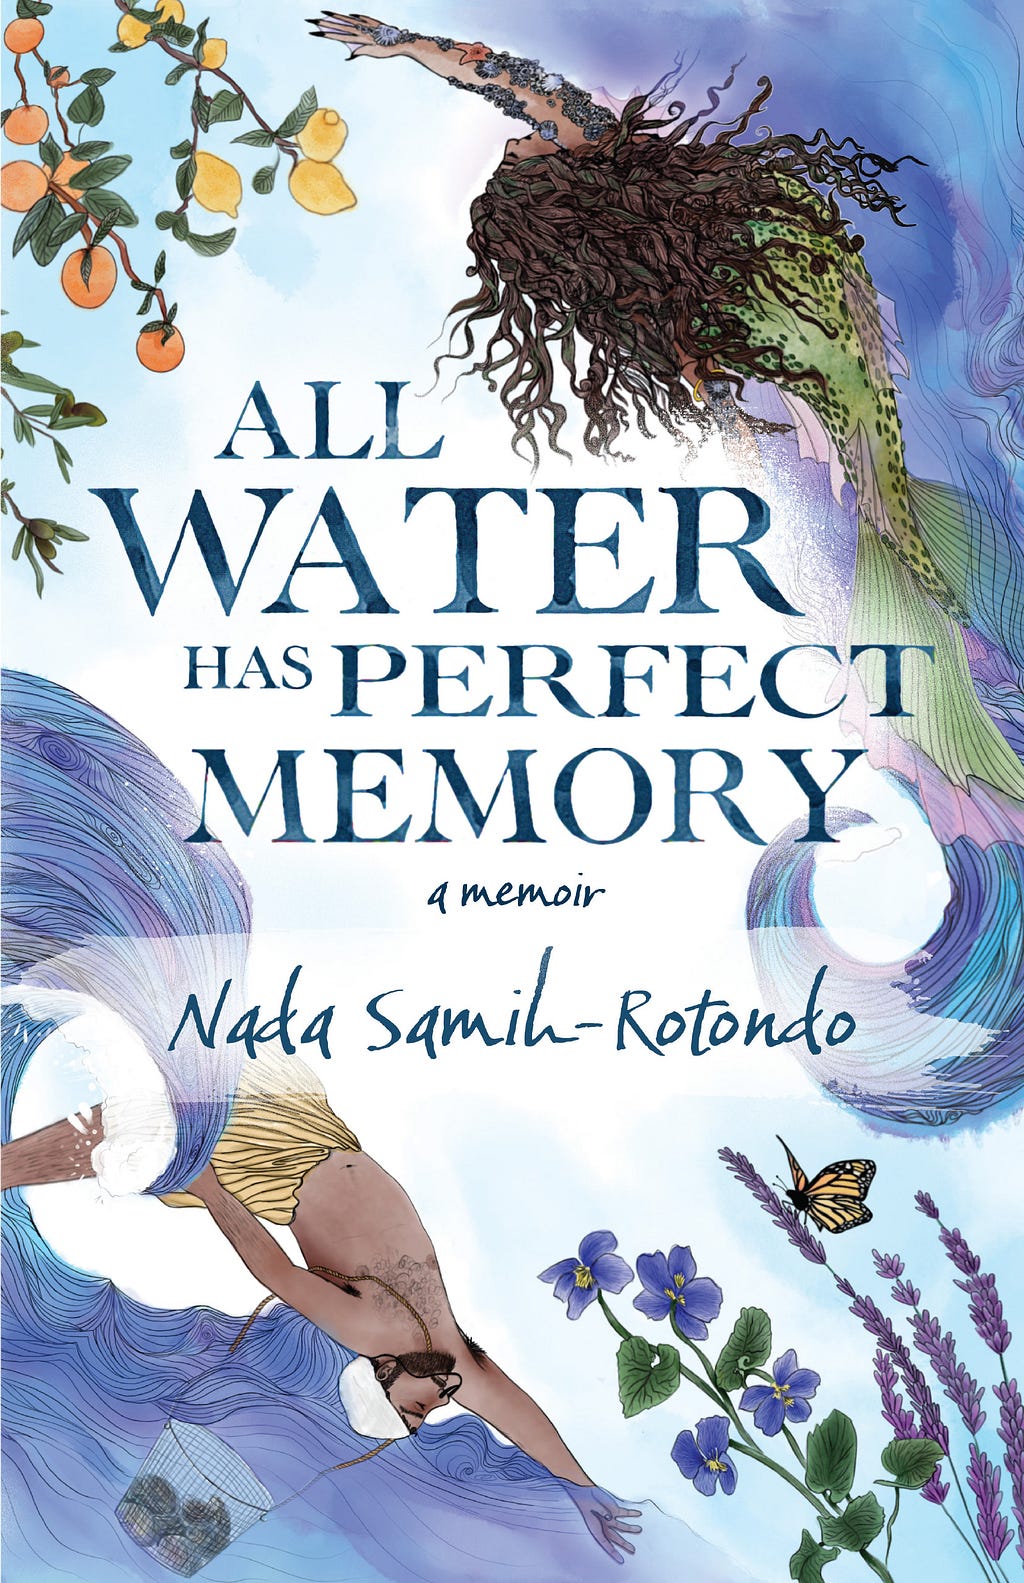 A cover of All Water Has Perfect Memory. A male and female mermaid circle the title in the center, as do flora.